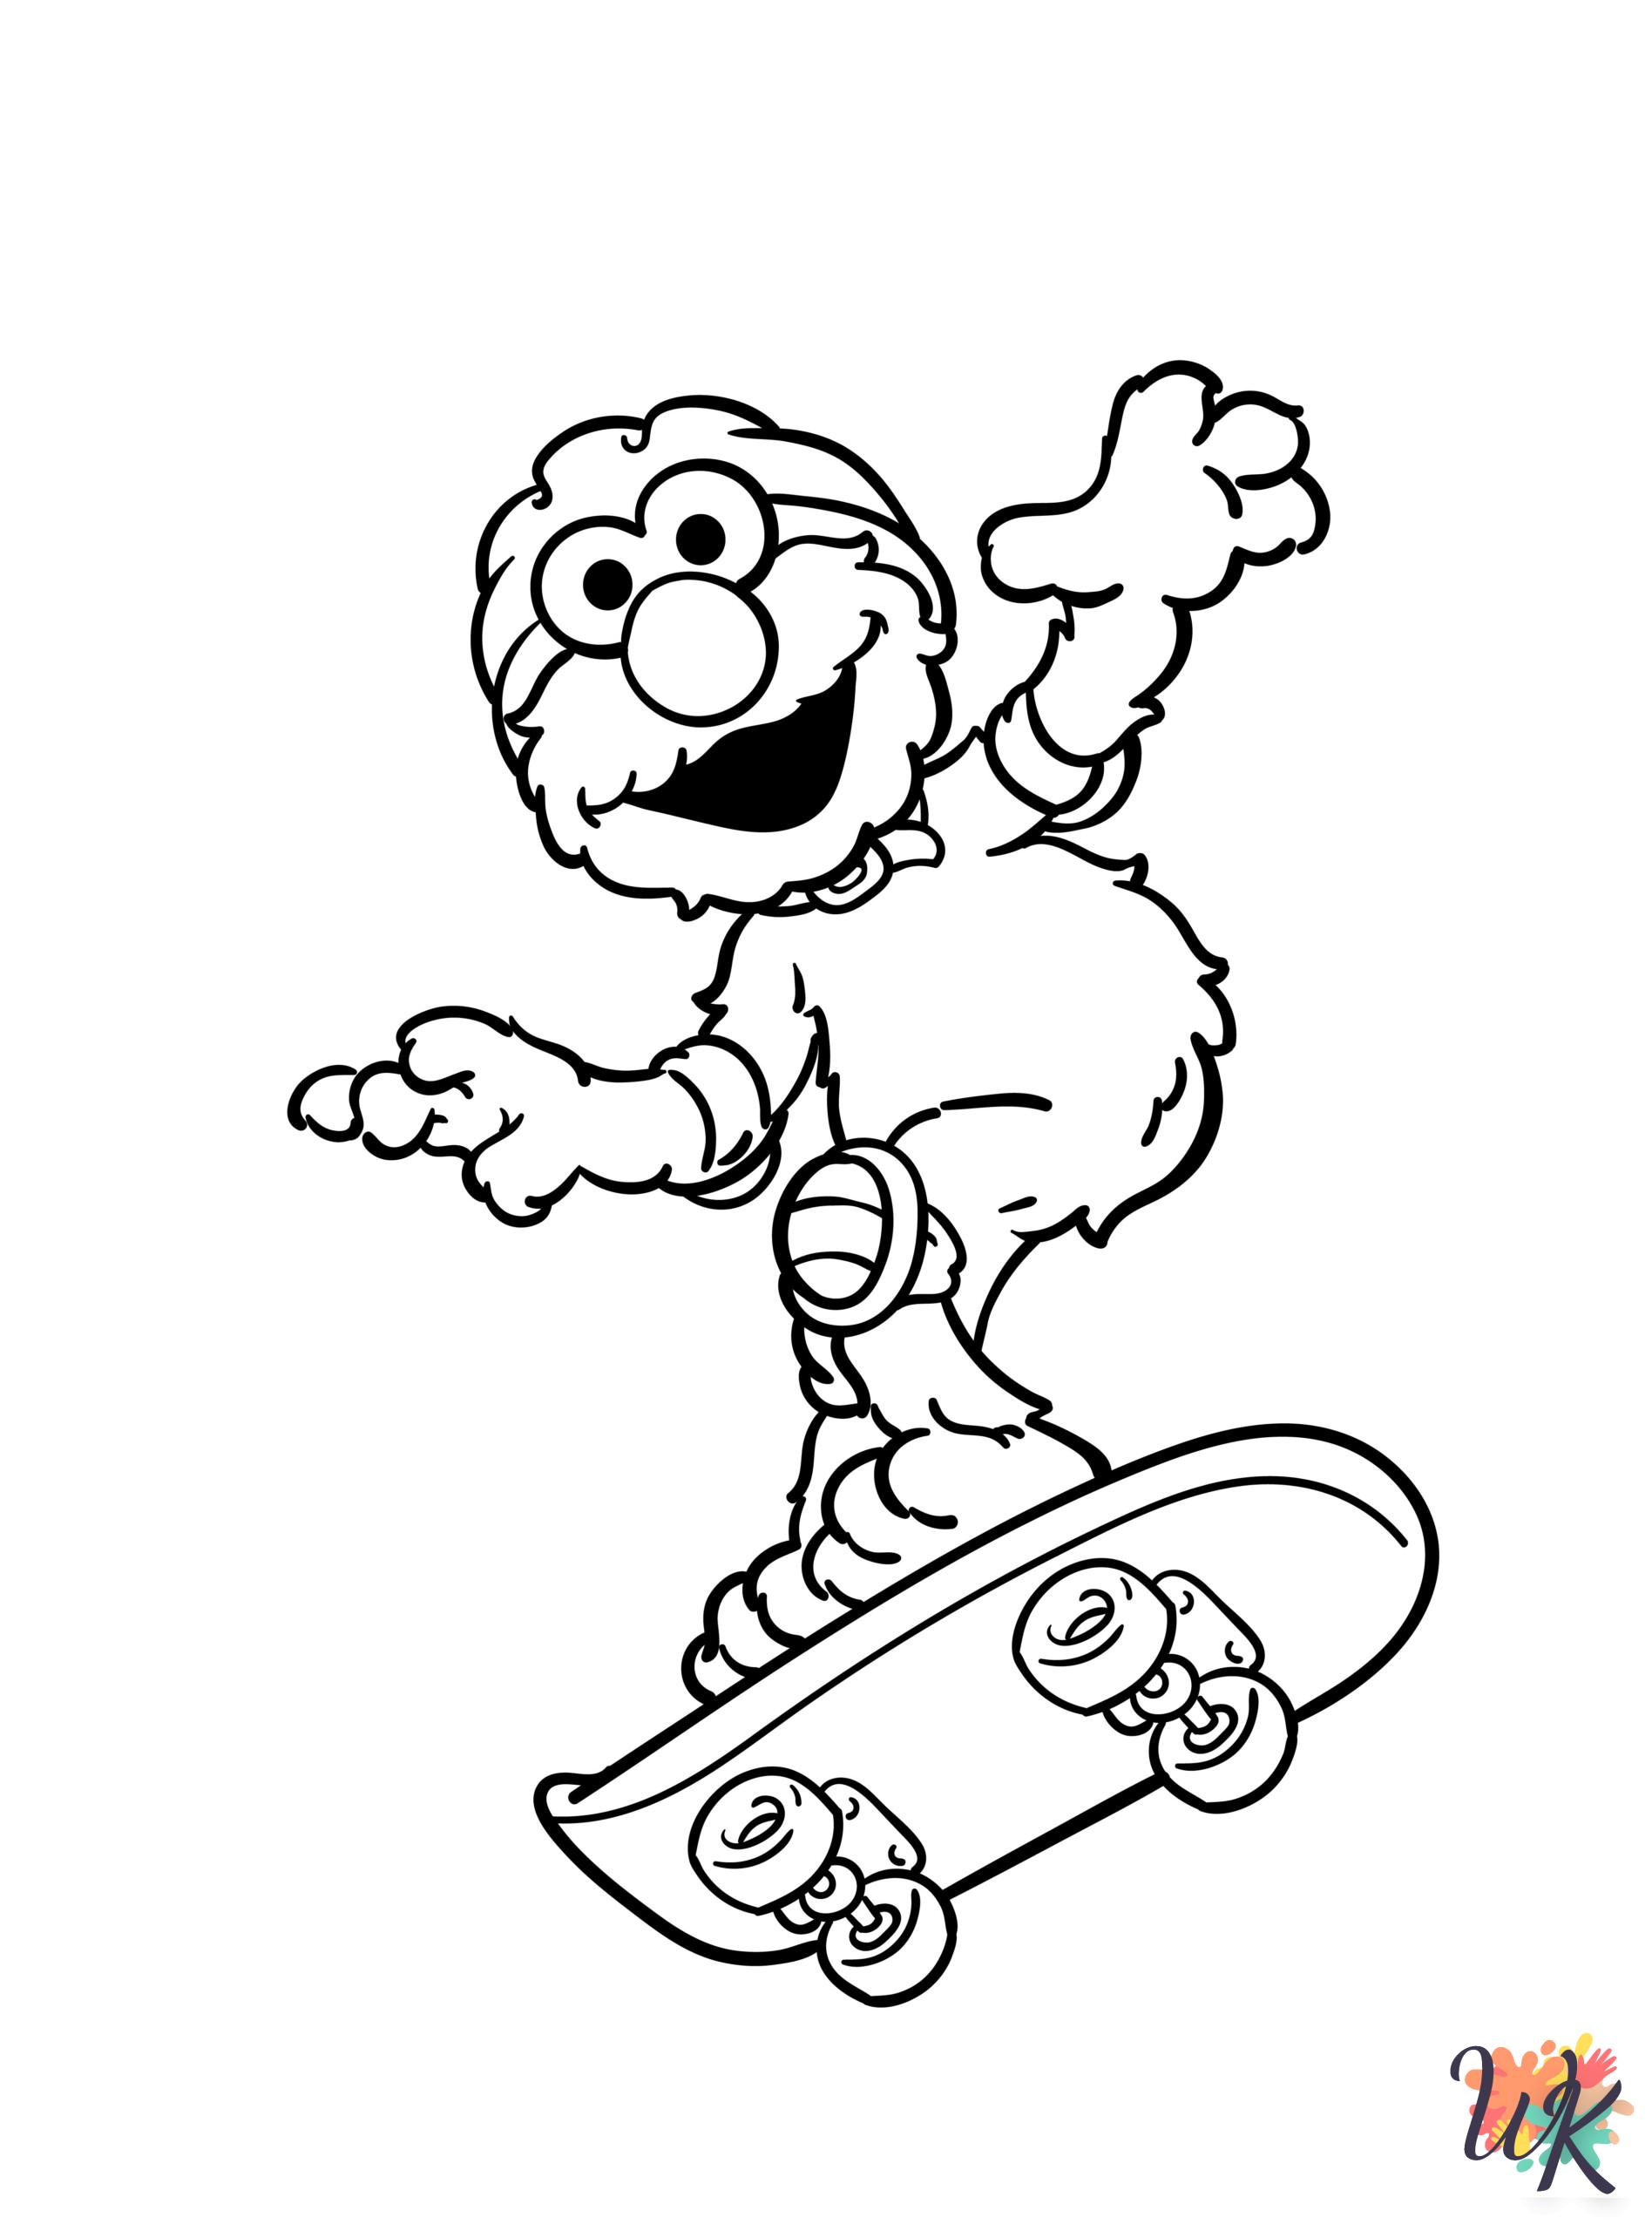 Elmo coloring pages 1